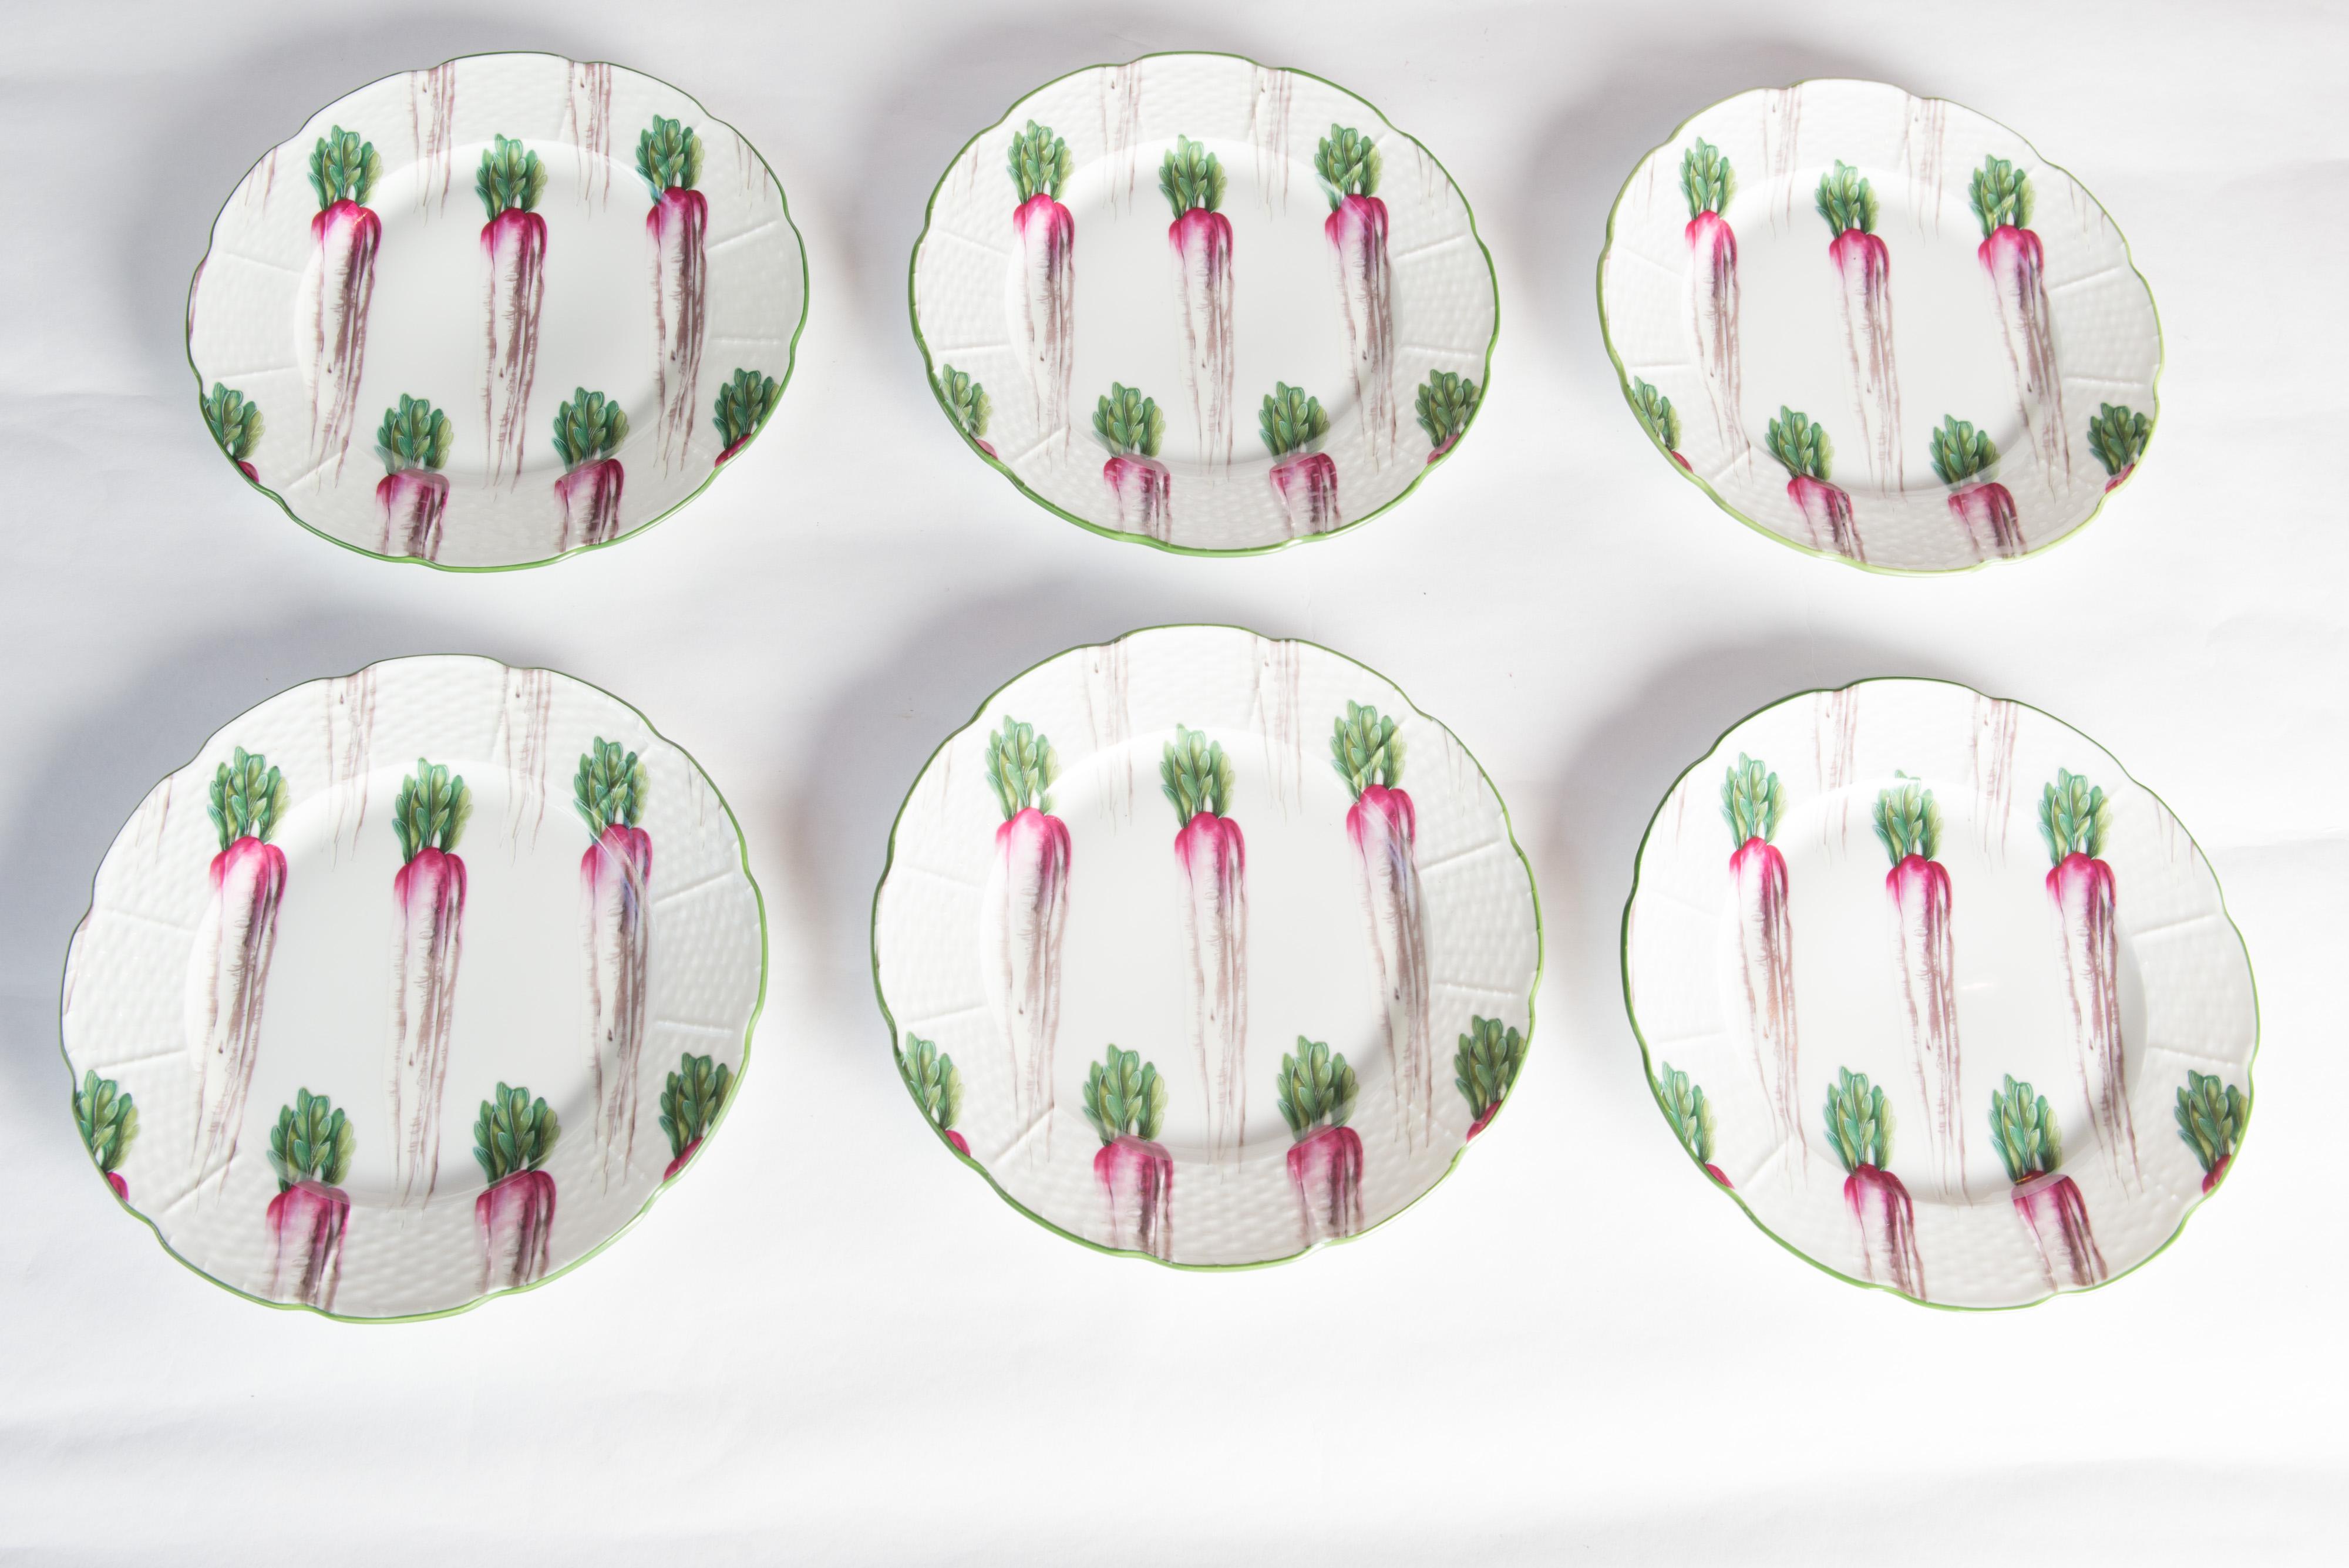 Mrs Henry Ford II Set of 12 French Limoges Plates 1